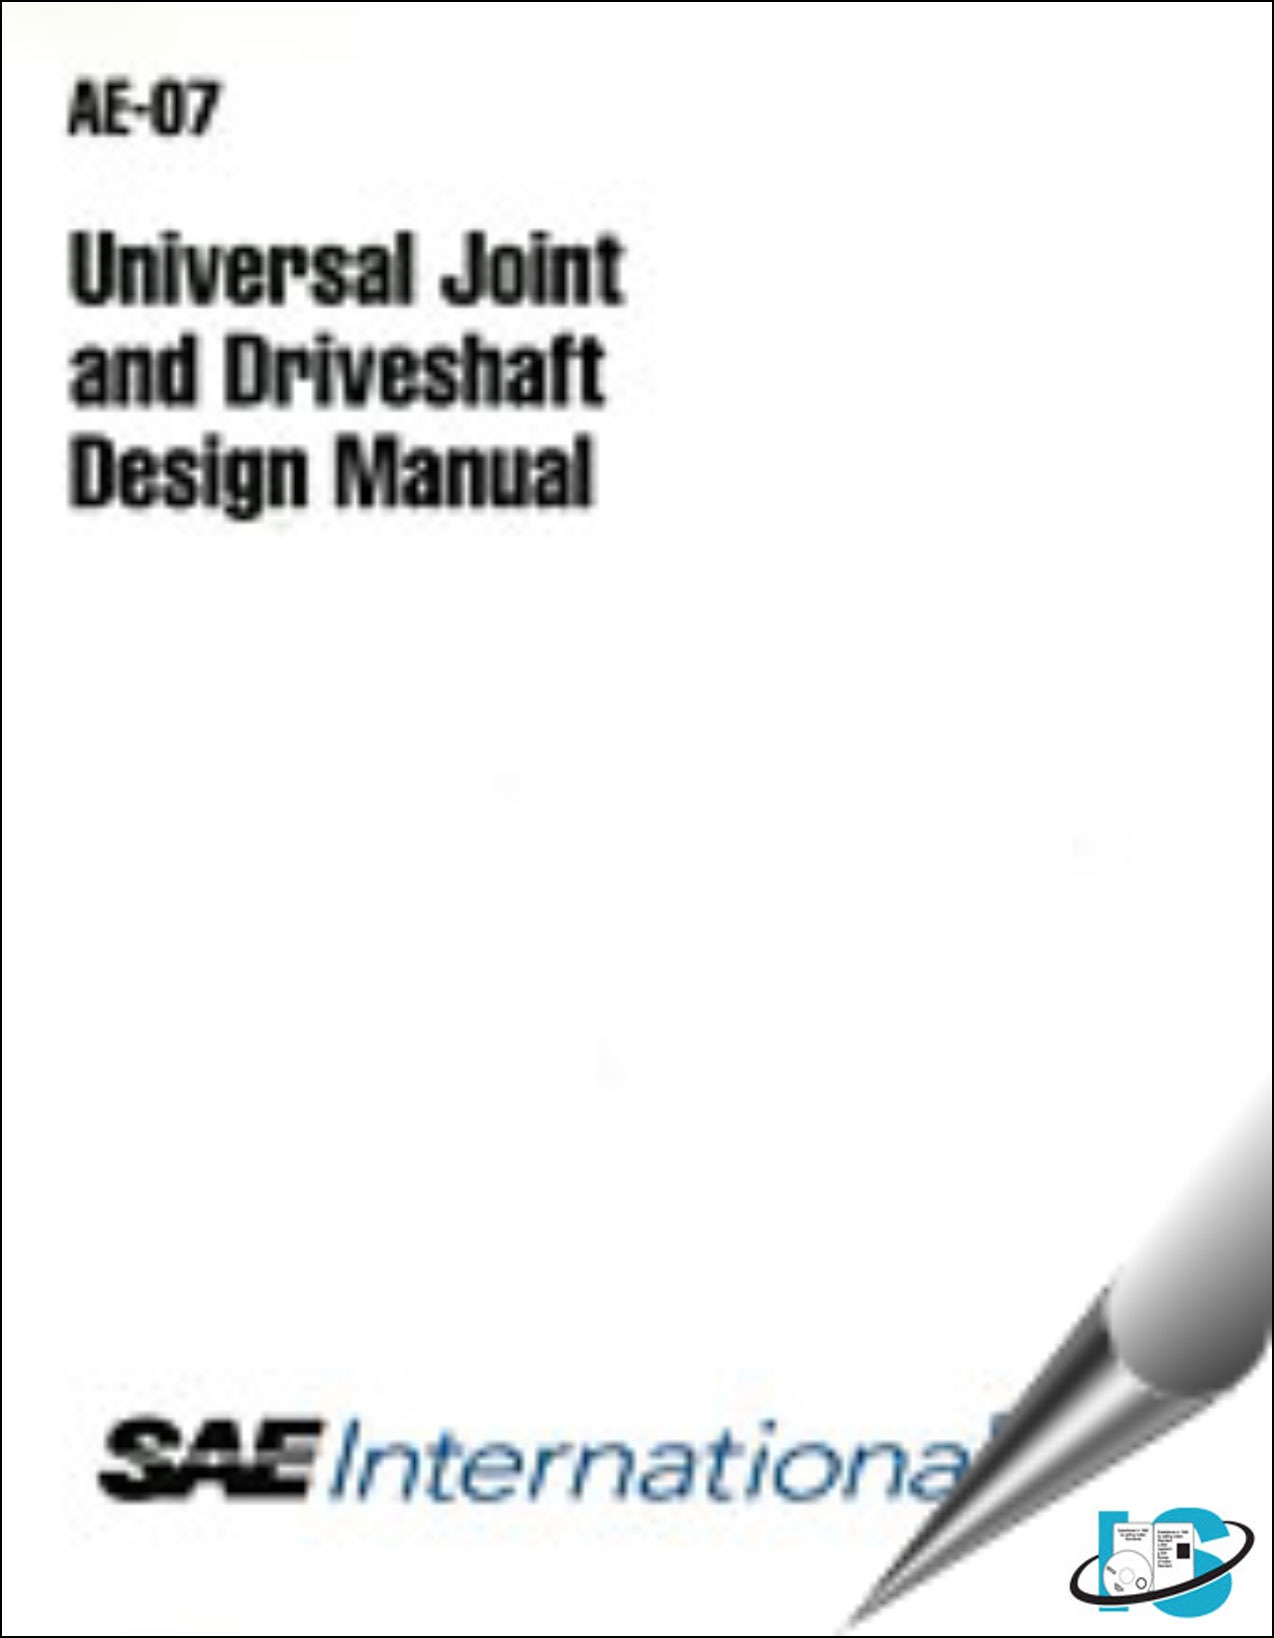 joint travel manual